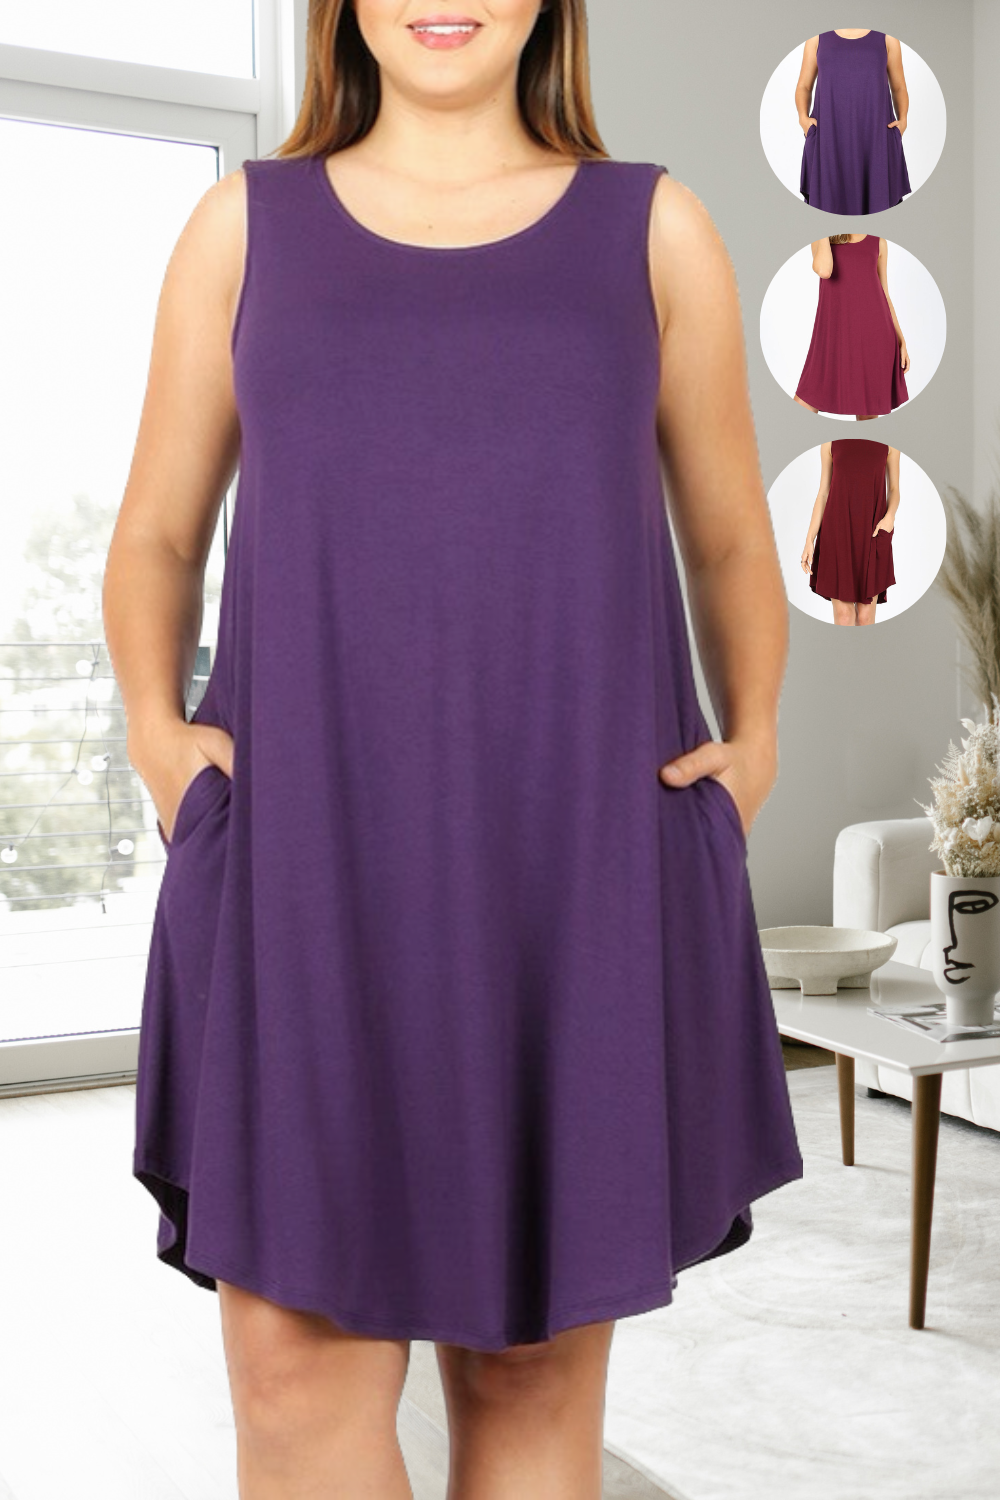 Womens PLUS size Tessie Sleeveless Tank Dress with Pockets 1XL, 2XL, 3XL Rounded Scoop Neckline Swing A-line Relaxed Silhouette. Solid Colors: Dark Purple, Dark Burgundy Maroon, Wine